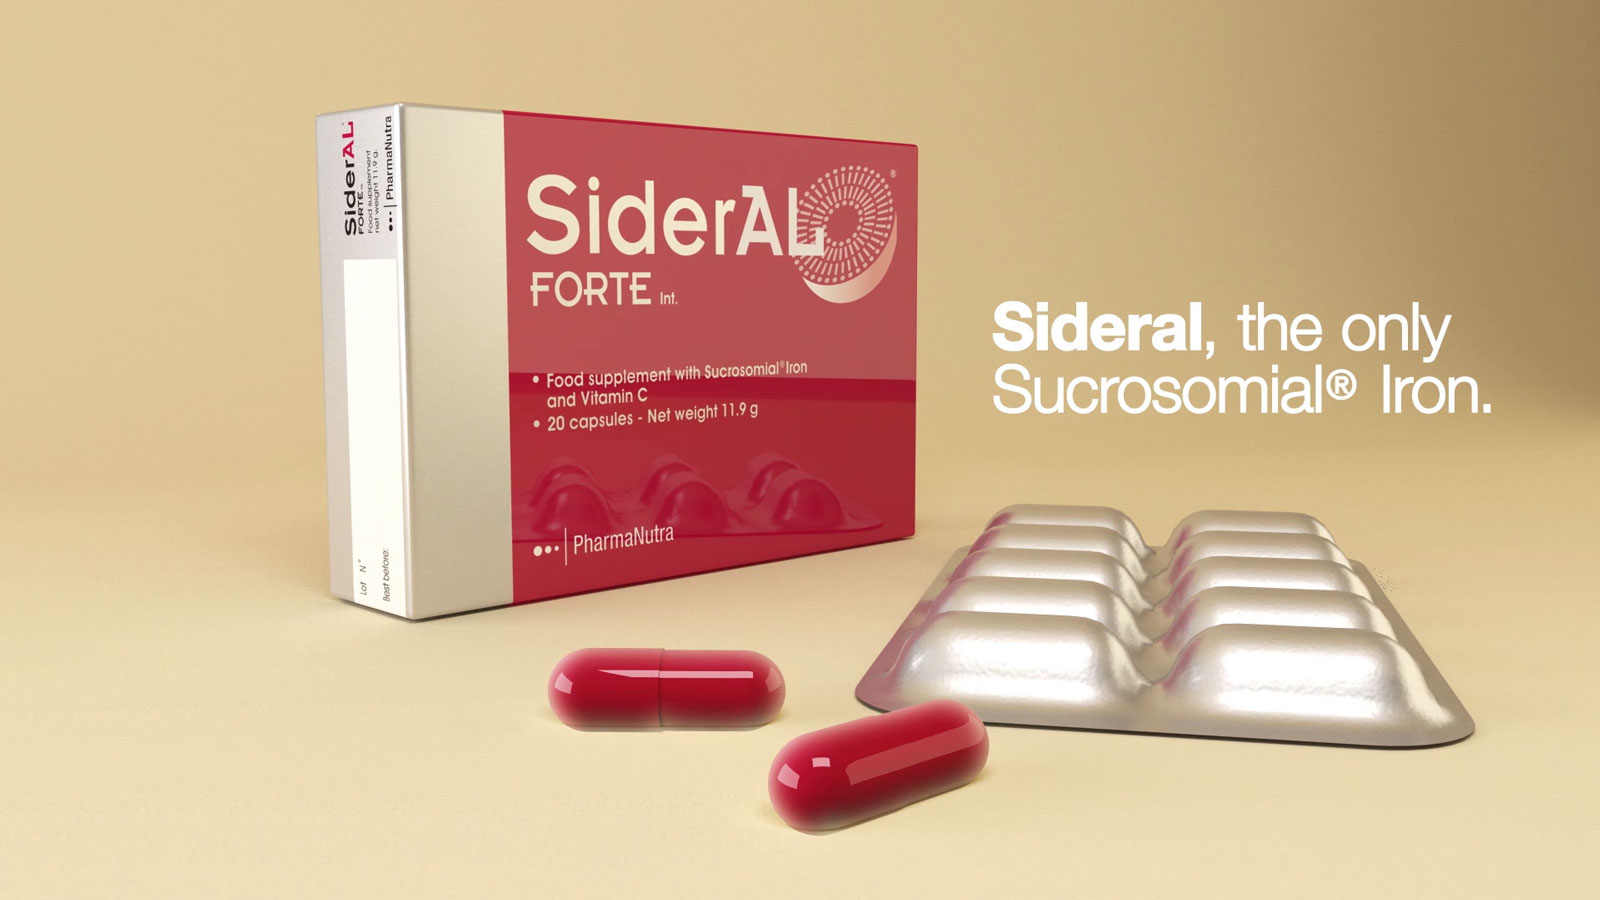 Sideral - Ad for Sucrosomial medication 